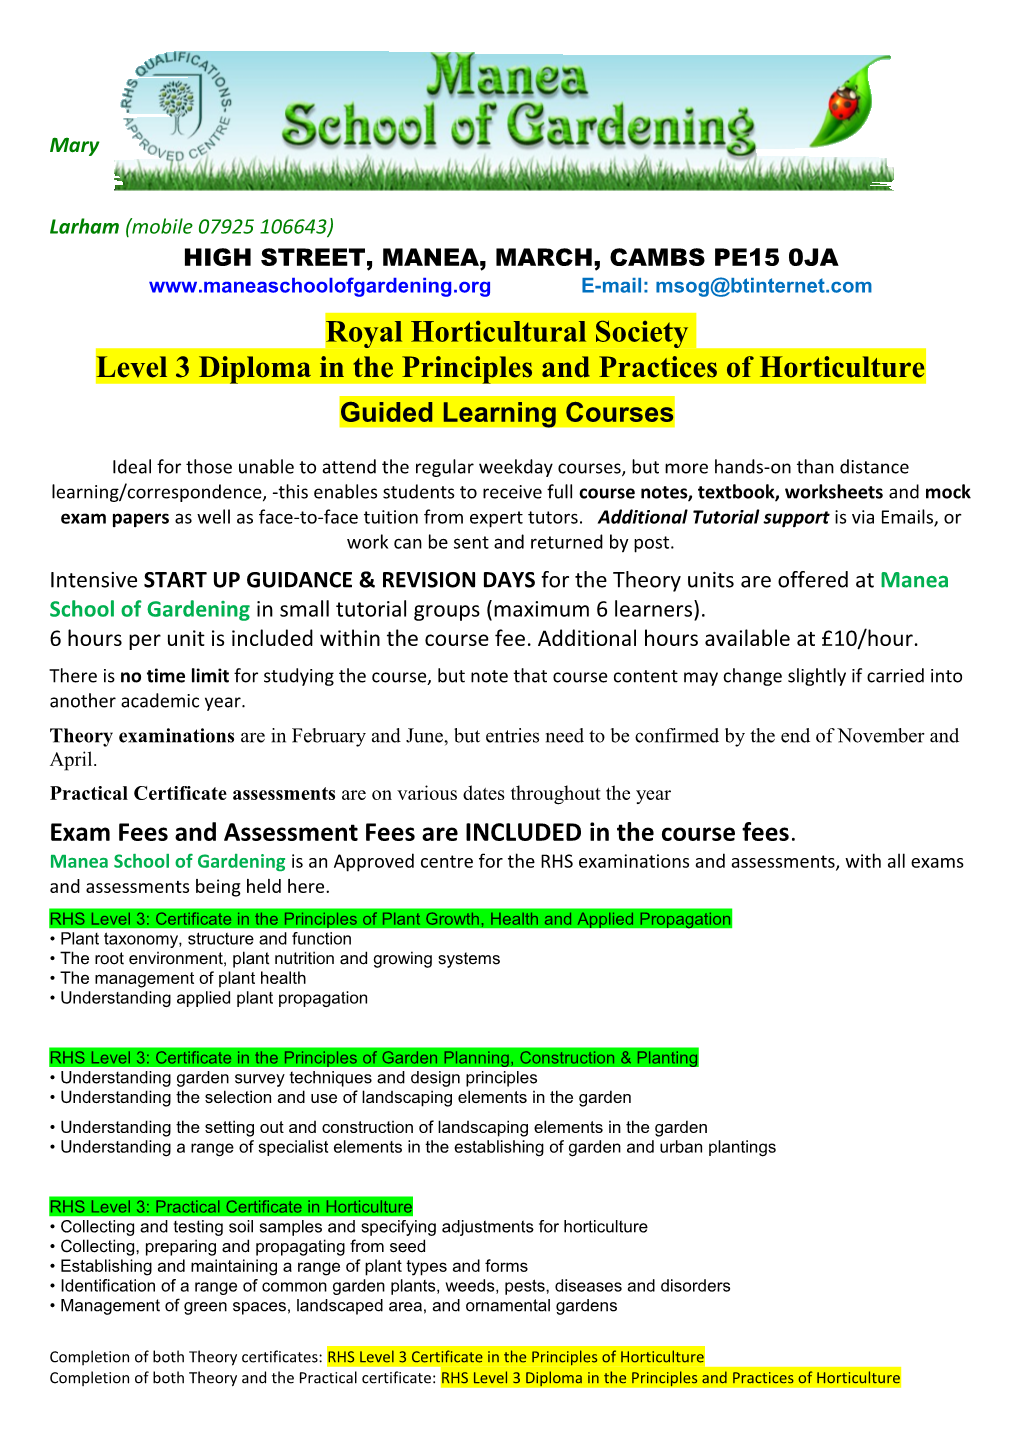 Level 3 Diploma in the Principles and Practices of Horticulture